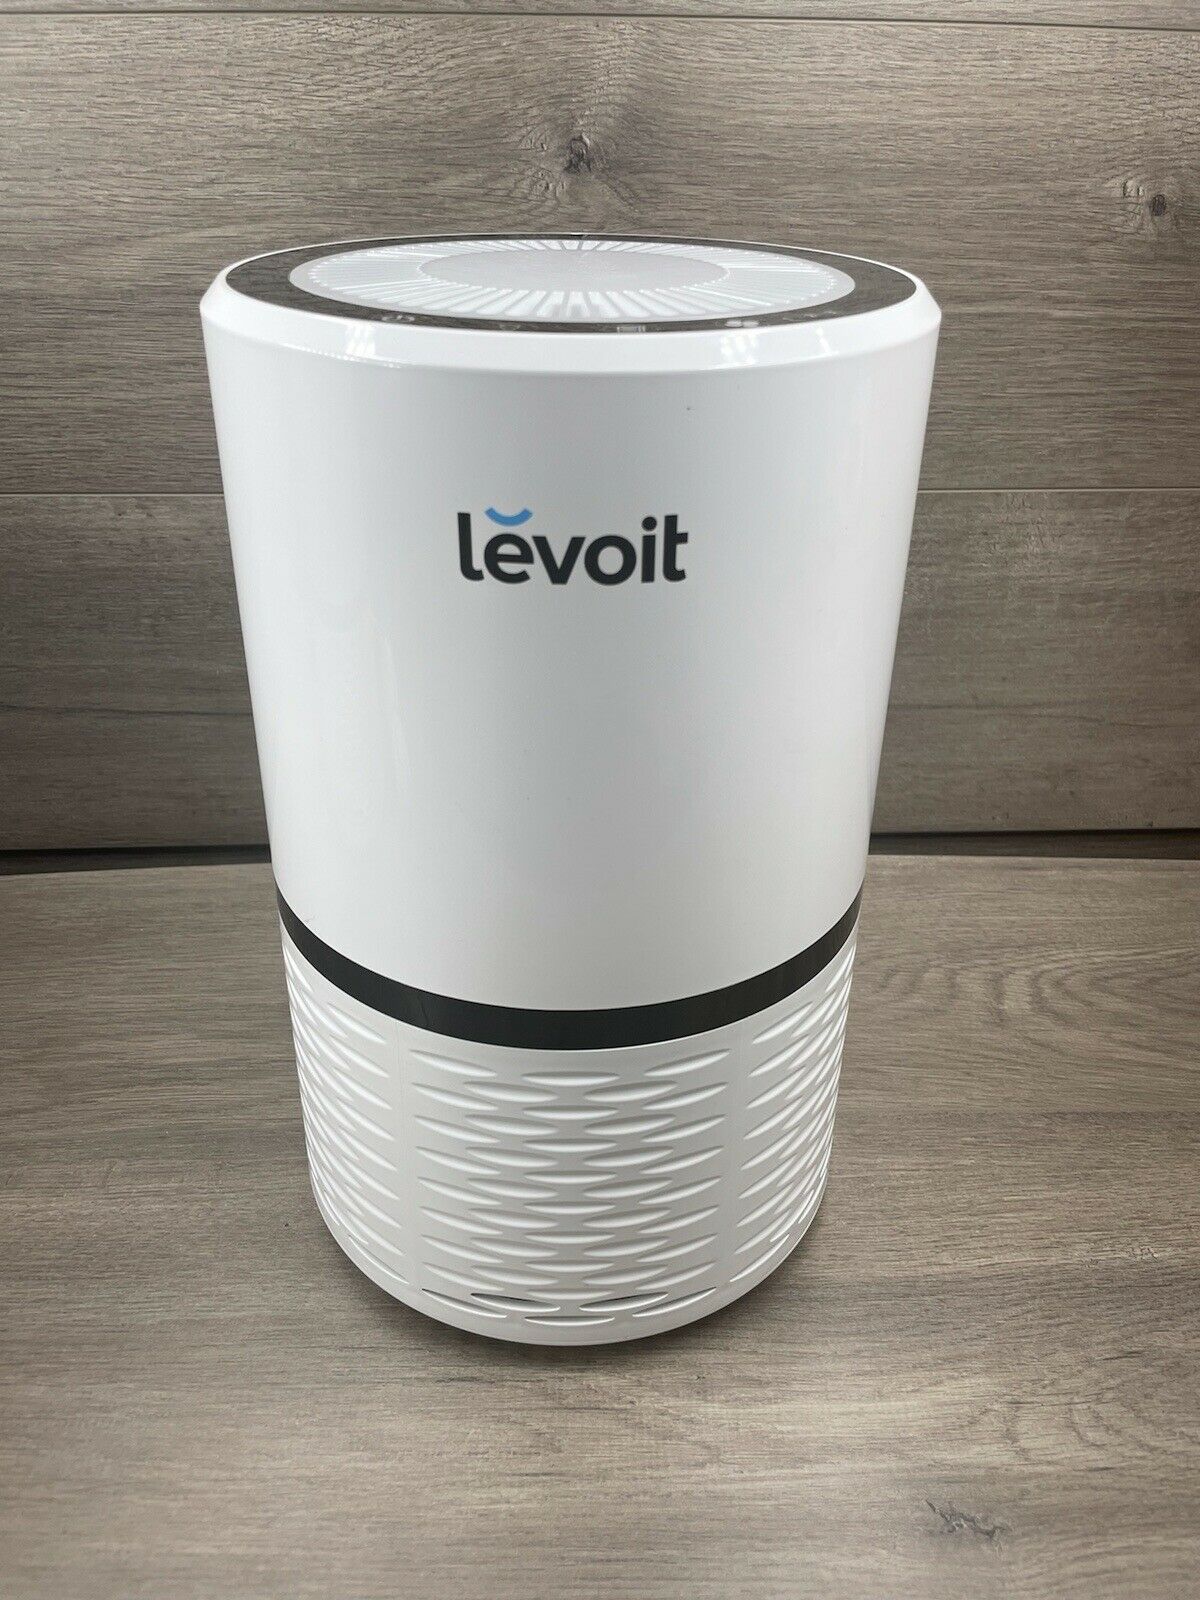 Levoit LV-H132 Compact HEPA Air Purifier with True HEPA - Clean Filter! Works